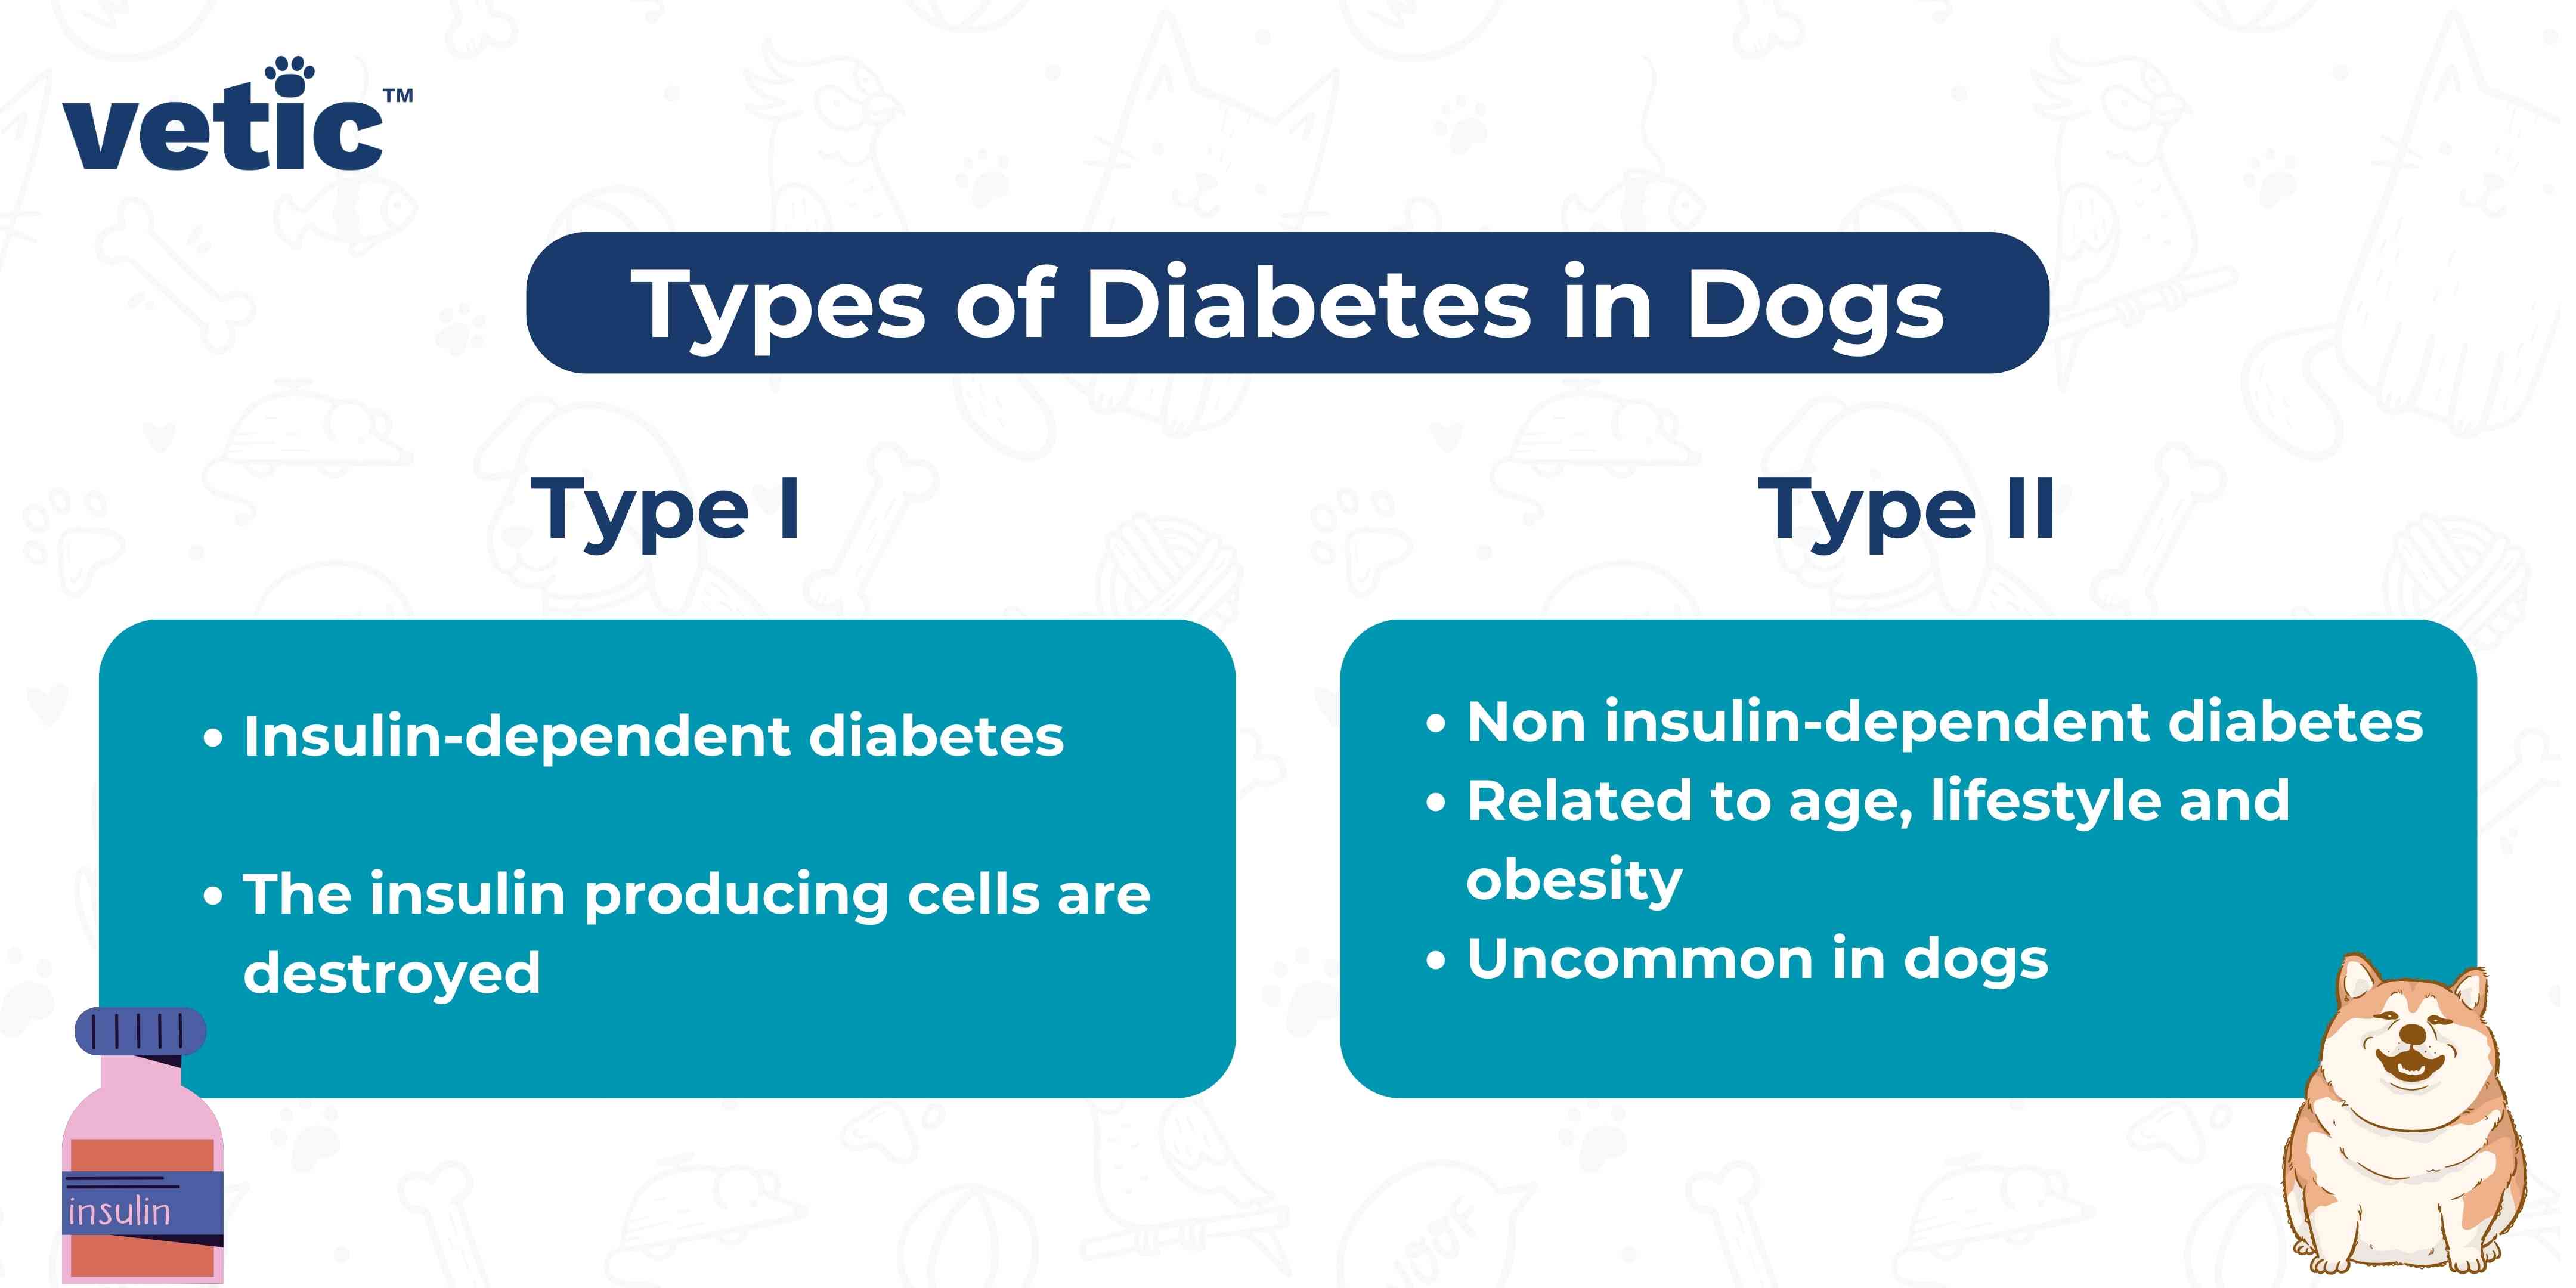 This image is an infographic that outlines the two types of diabetes found in dogs, Type I and Type II. The title “Types of Diabetes in Dogs” is prominently displayed at the top center. Two colored text boxes provide information on Type I and Type II diabetes in dogs respectively. Type I is insulin-dependent diabetes, where the insulin-producing cells are destroyed. Type II is non-insulin-dependent diabetes, related to age, lifestyle, and obesity. It is uncommon in dogs.